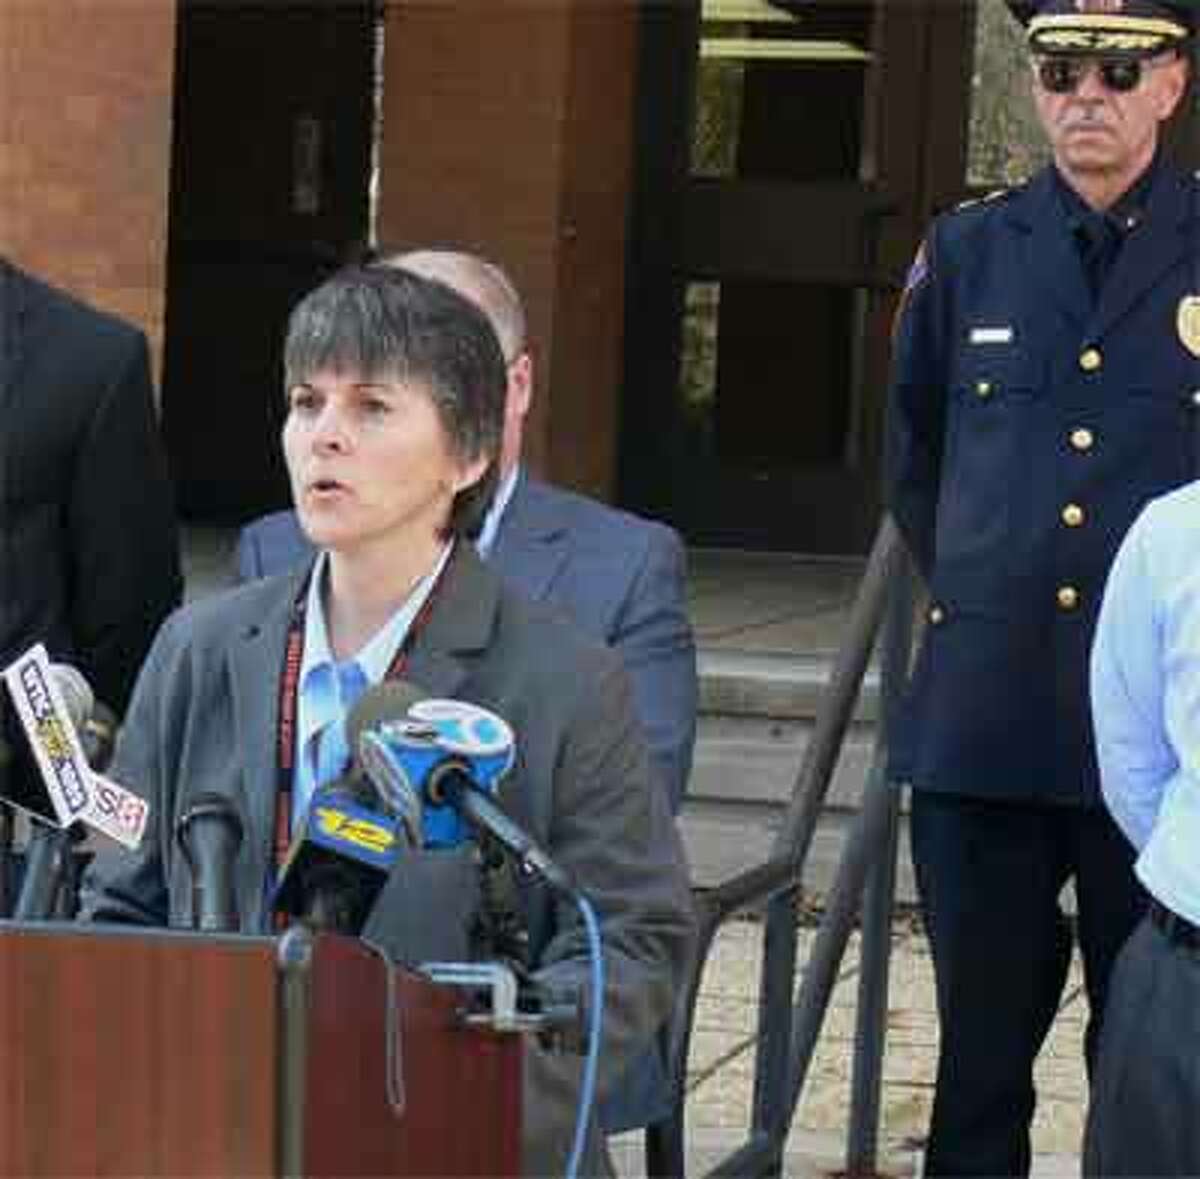 Shelton High School Headmaster Beth Smith addresses members of the media, with Shelton Police Chief Joel Hurliman standing in the background on the right.